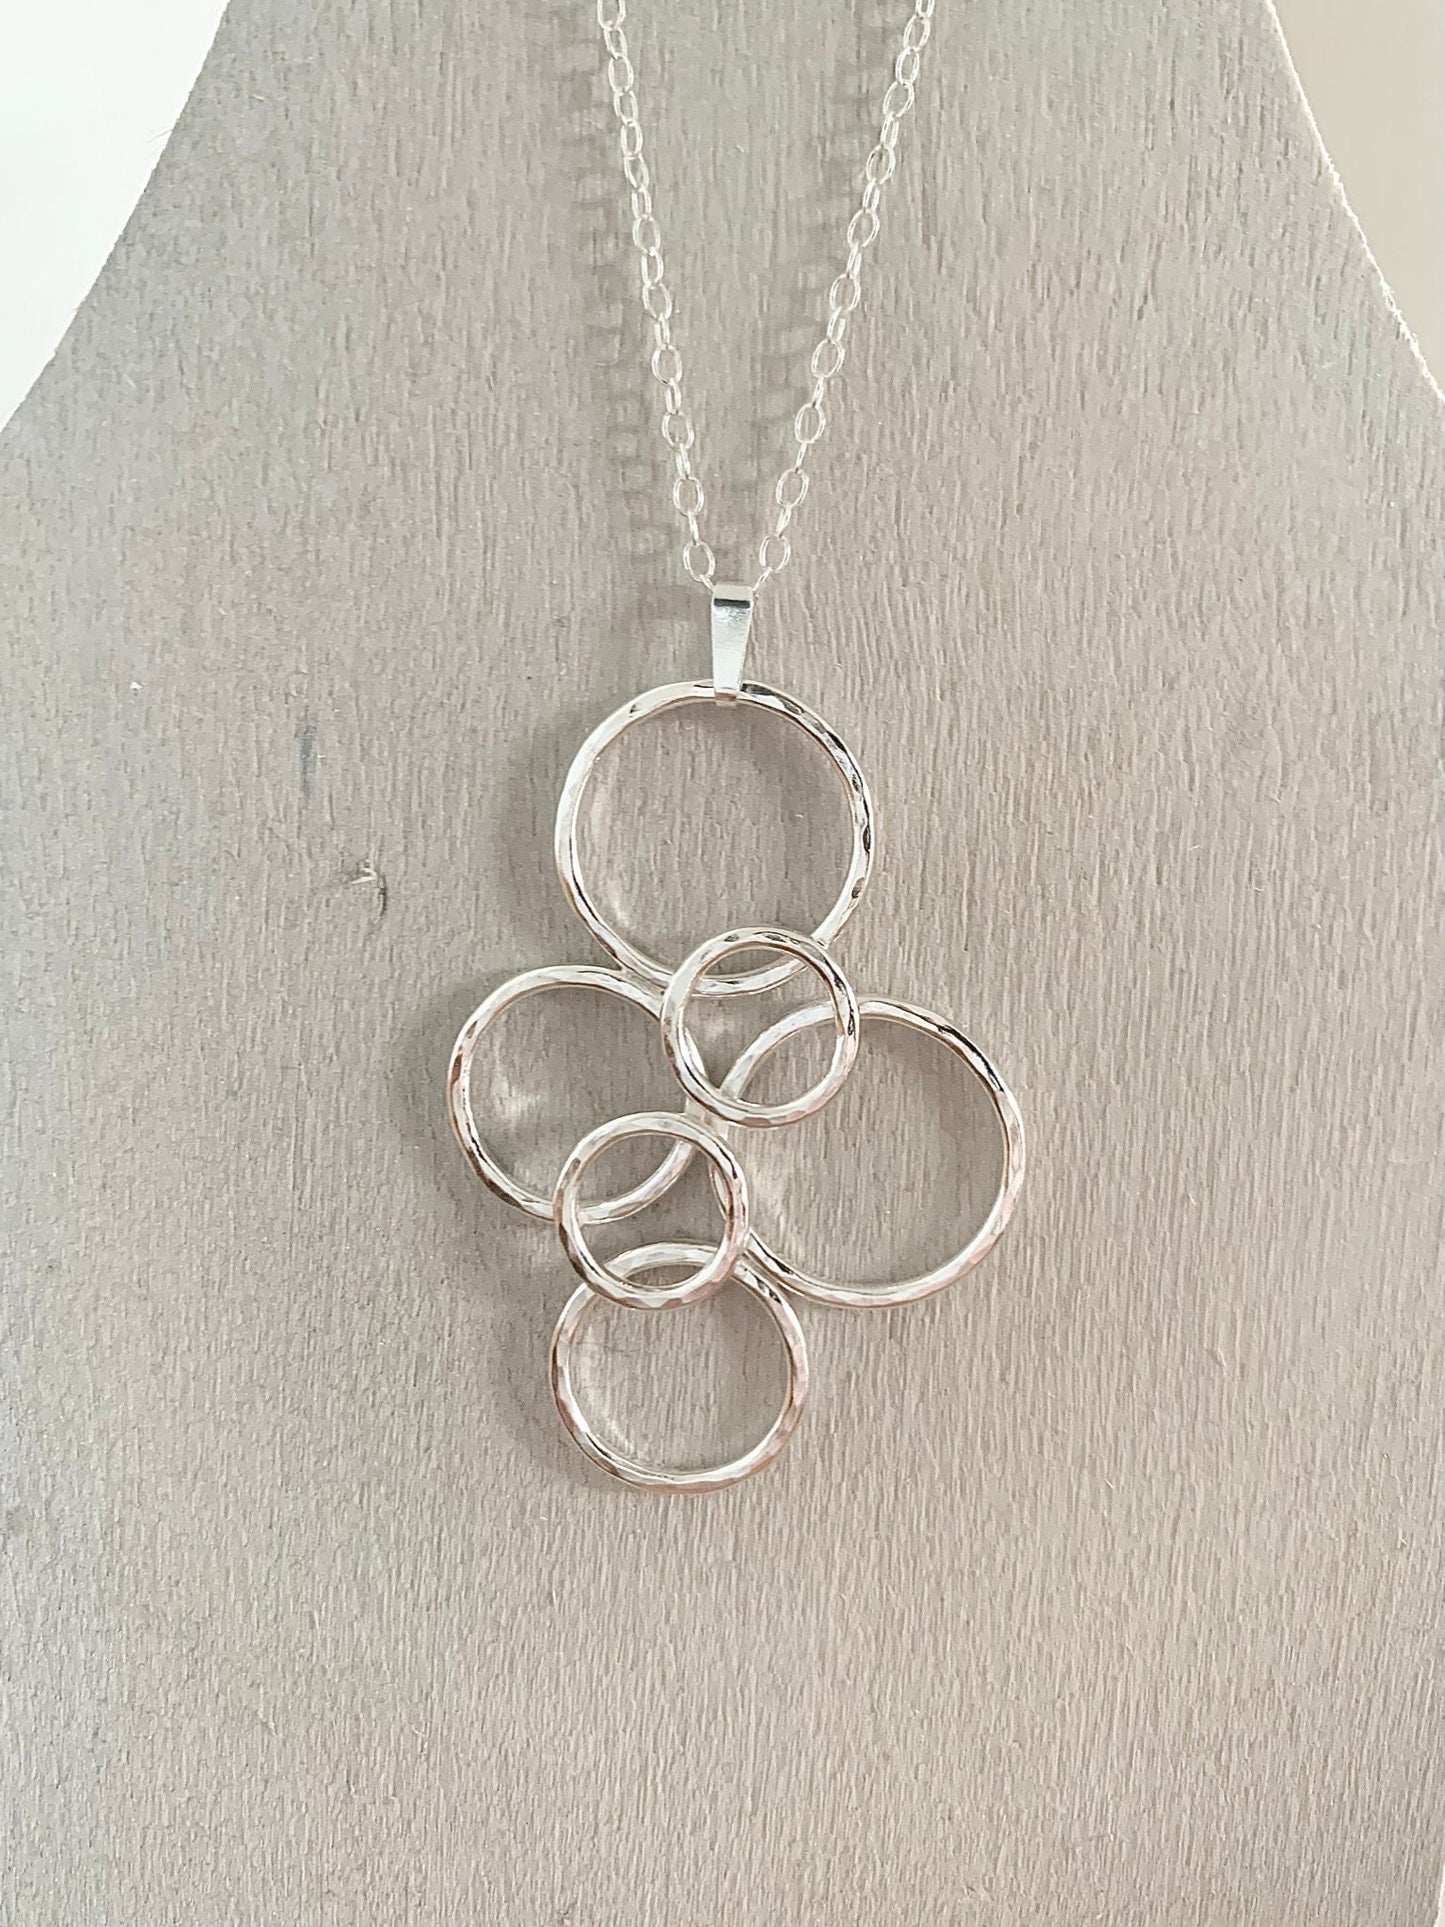 Large sterling silver necklace, silver bubbles necklace